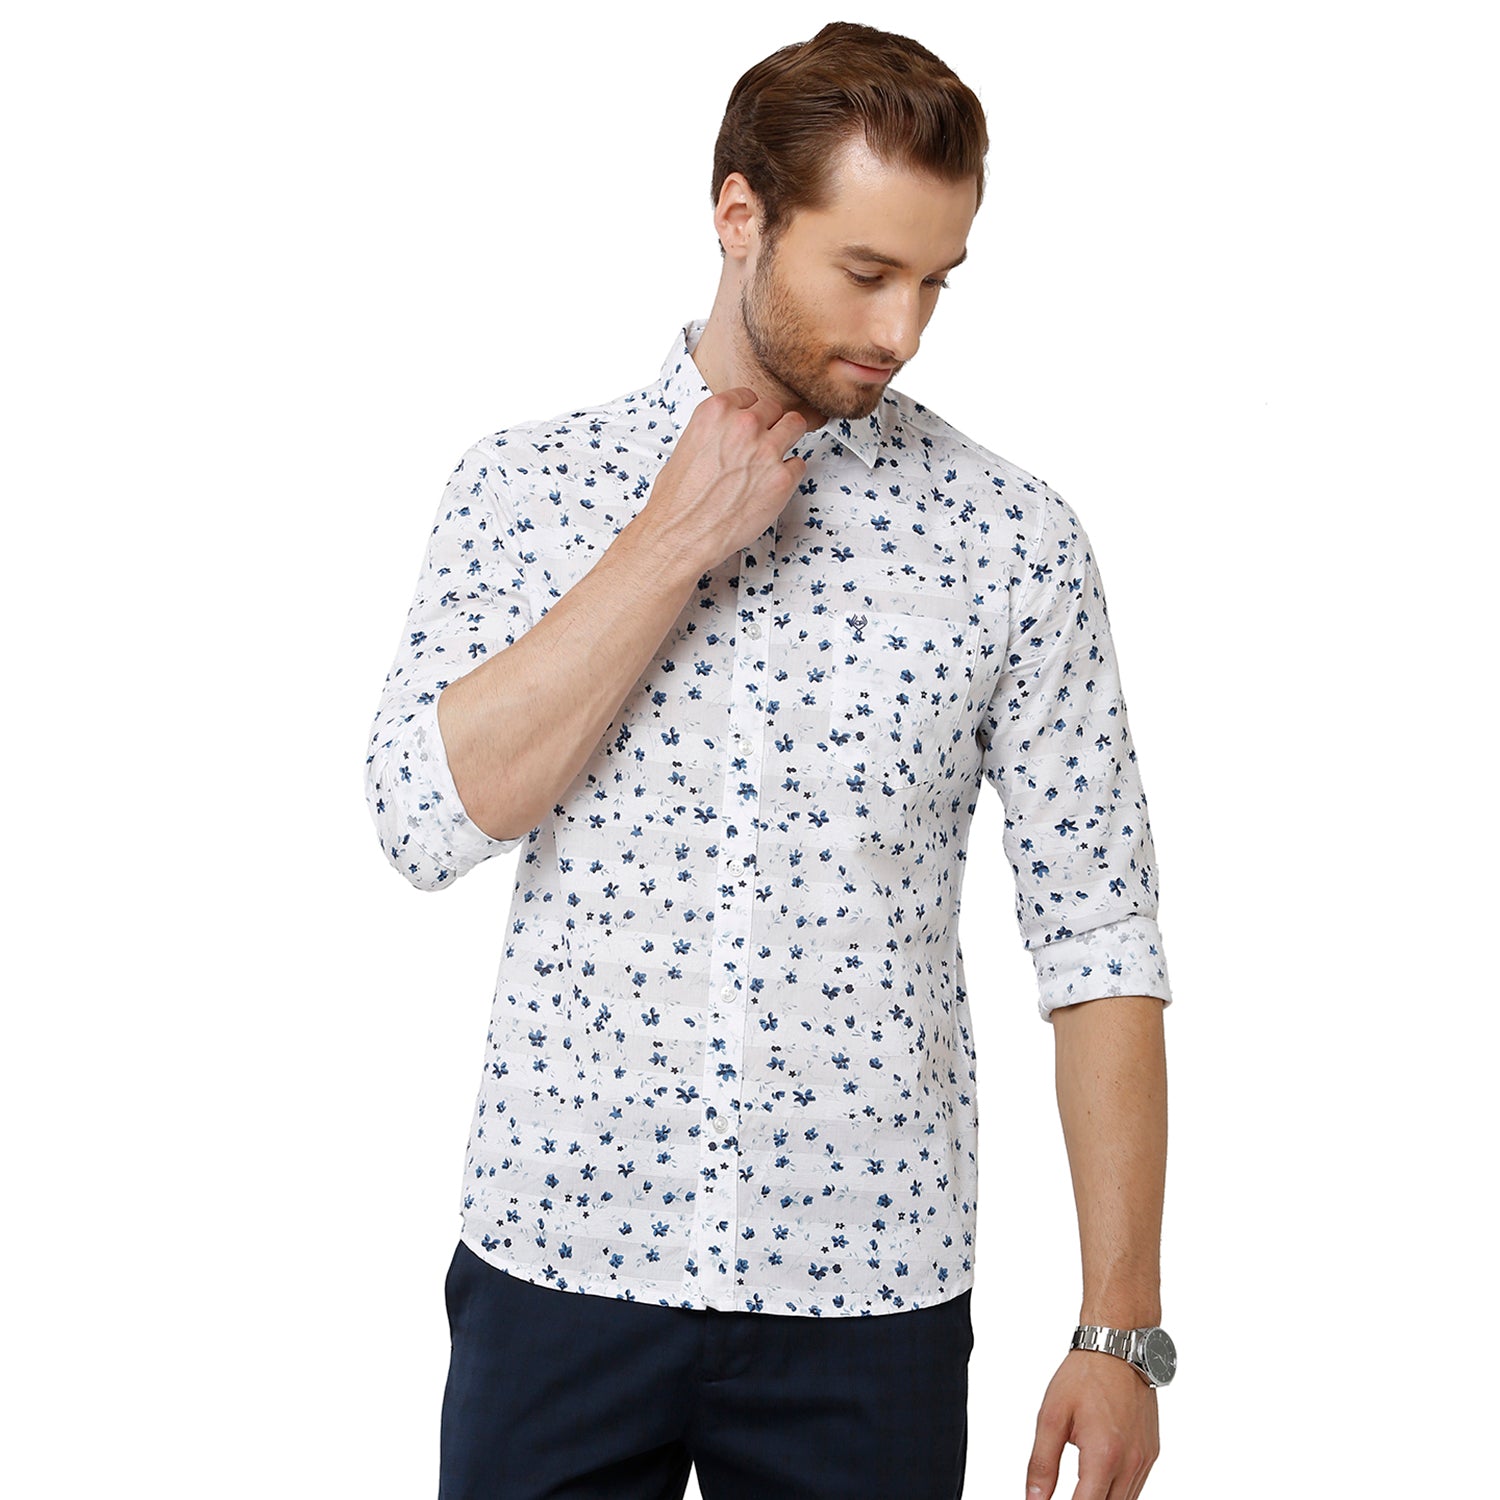 Classic Polo Mens 100% Cotton Full Sleeve Printed Slim Fit White Color Woven Shirt -SN1-86 B Shirts Classic Polo 